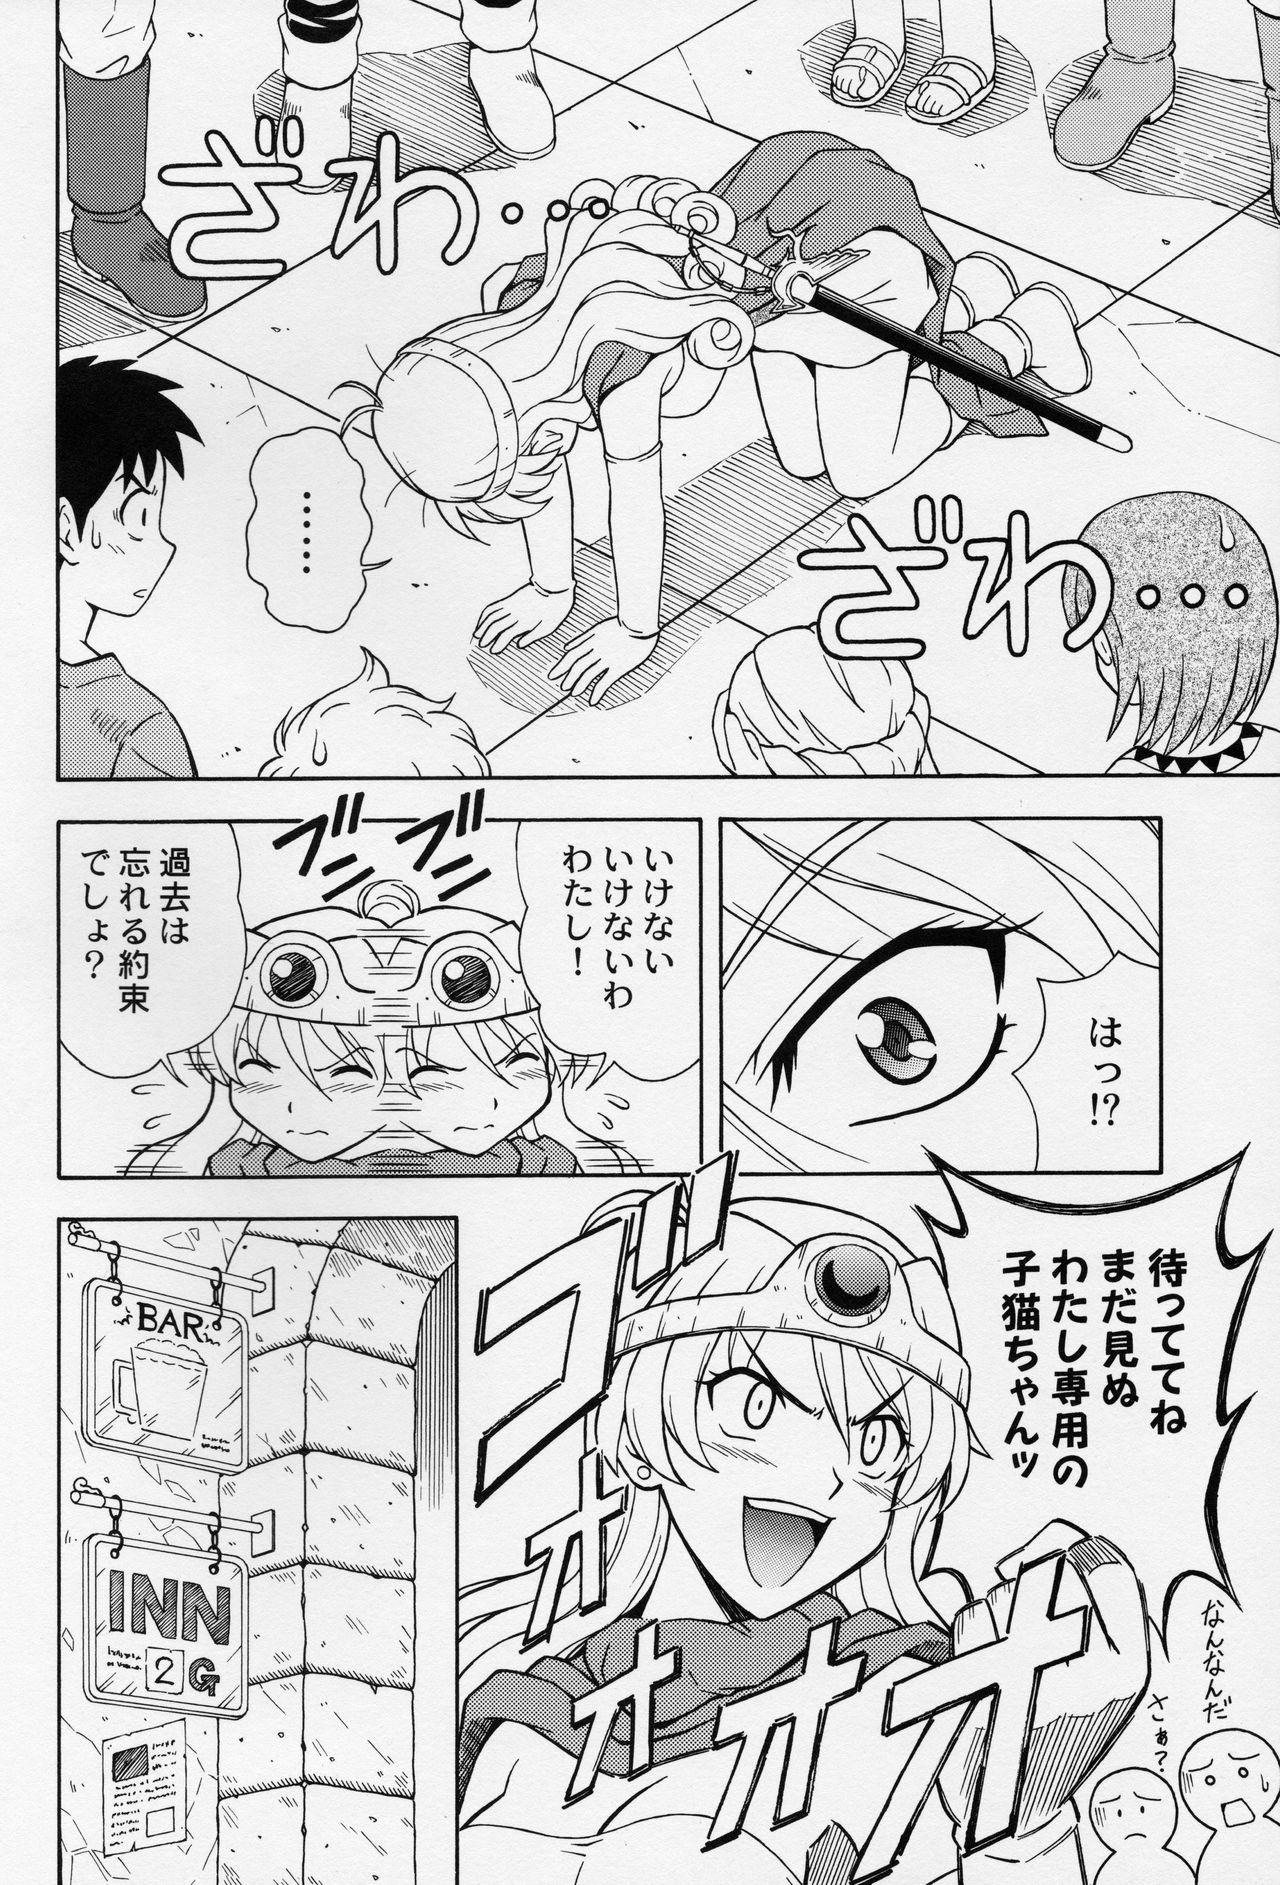 Hot Pussy Moe Moe Quest Z Vol. 2 - Dragon quest iii Private - Page 9